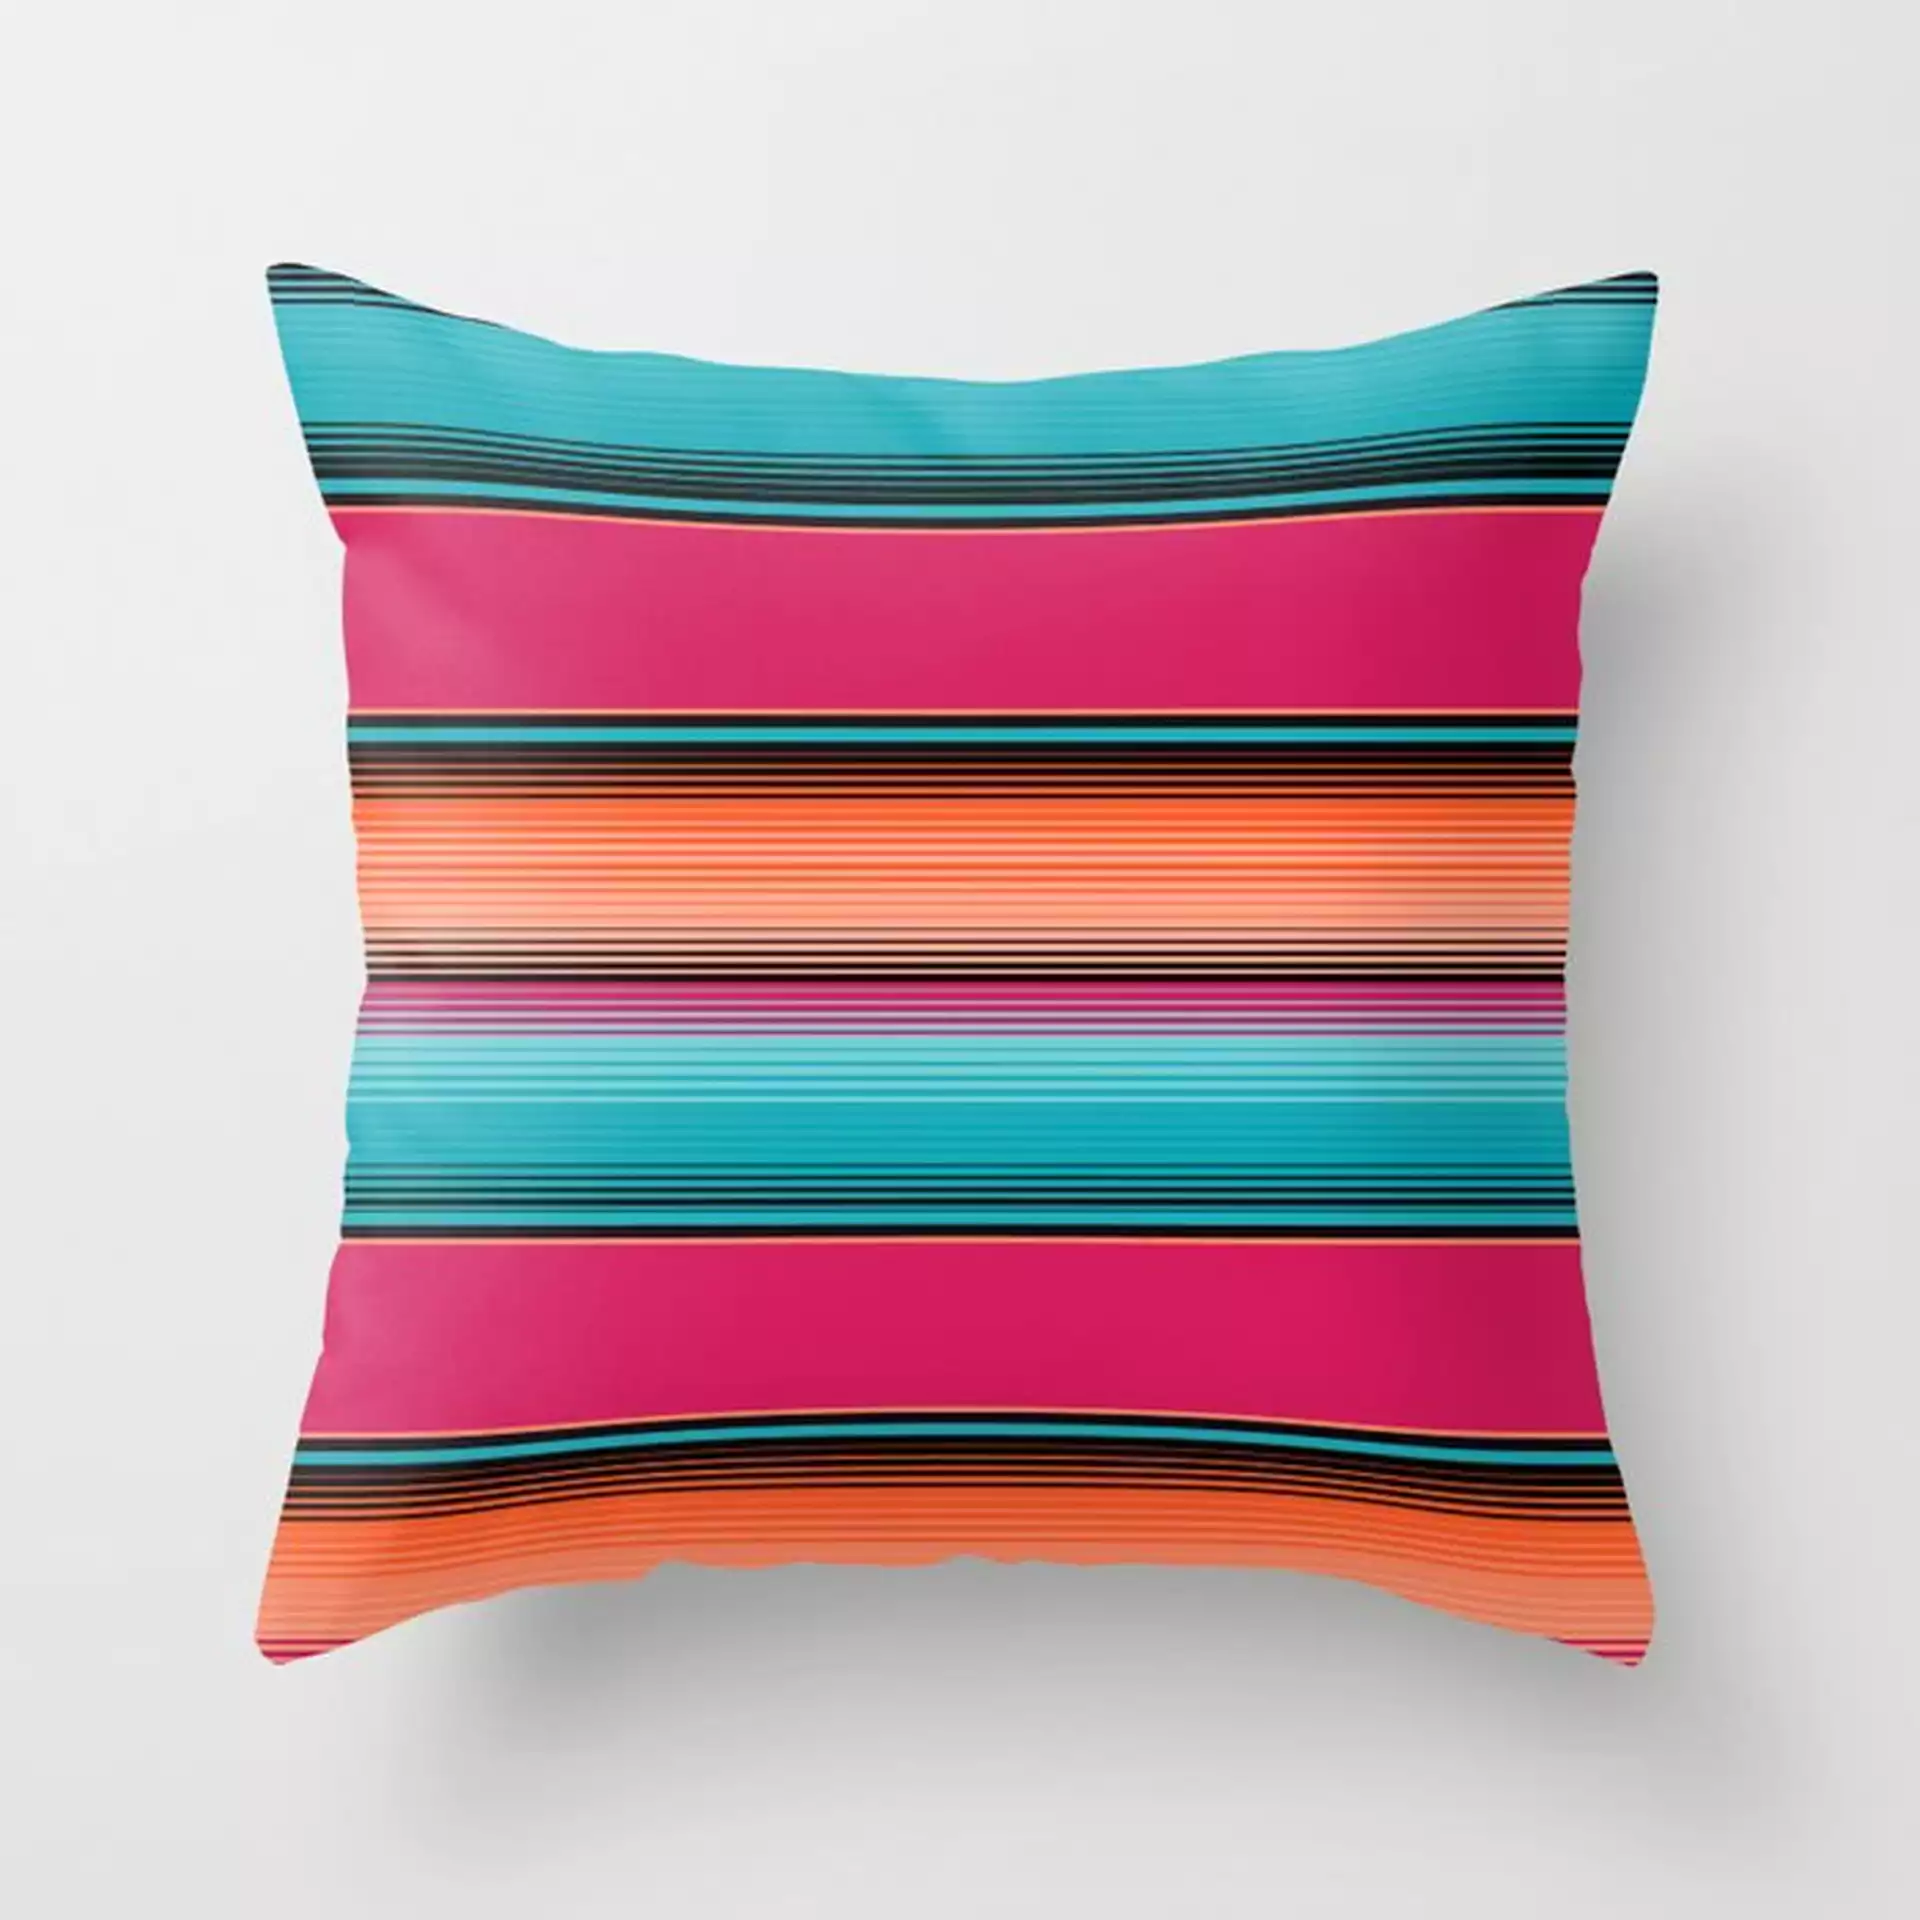 Traditional Mexican Serape In Teal Couch Throw Pillow by Becky Bailey - Cover (18" x 18") with pillow insert - Outdoor Pillow